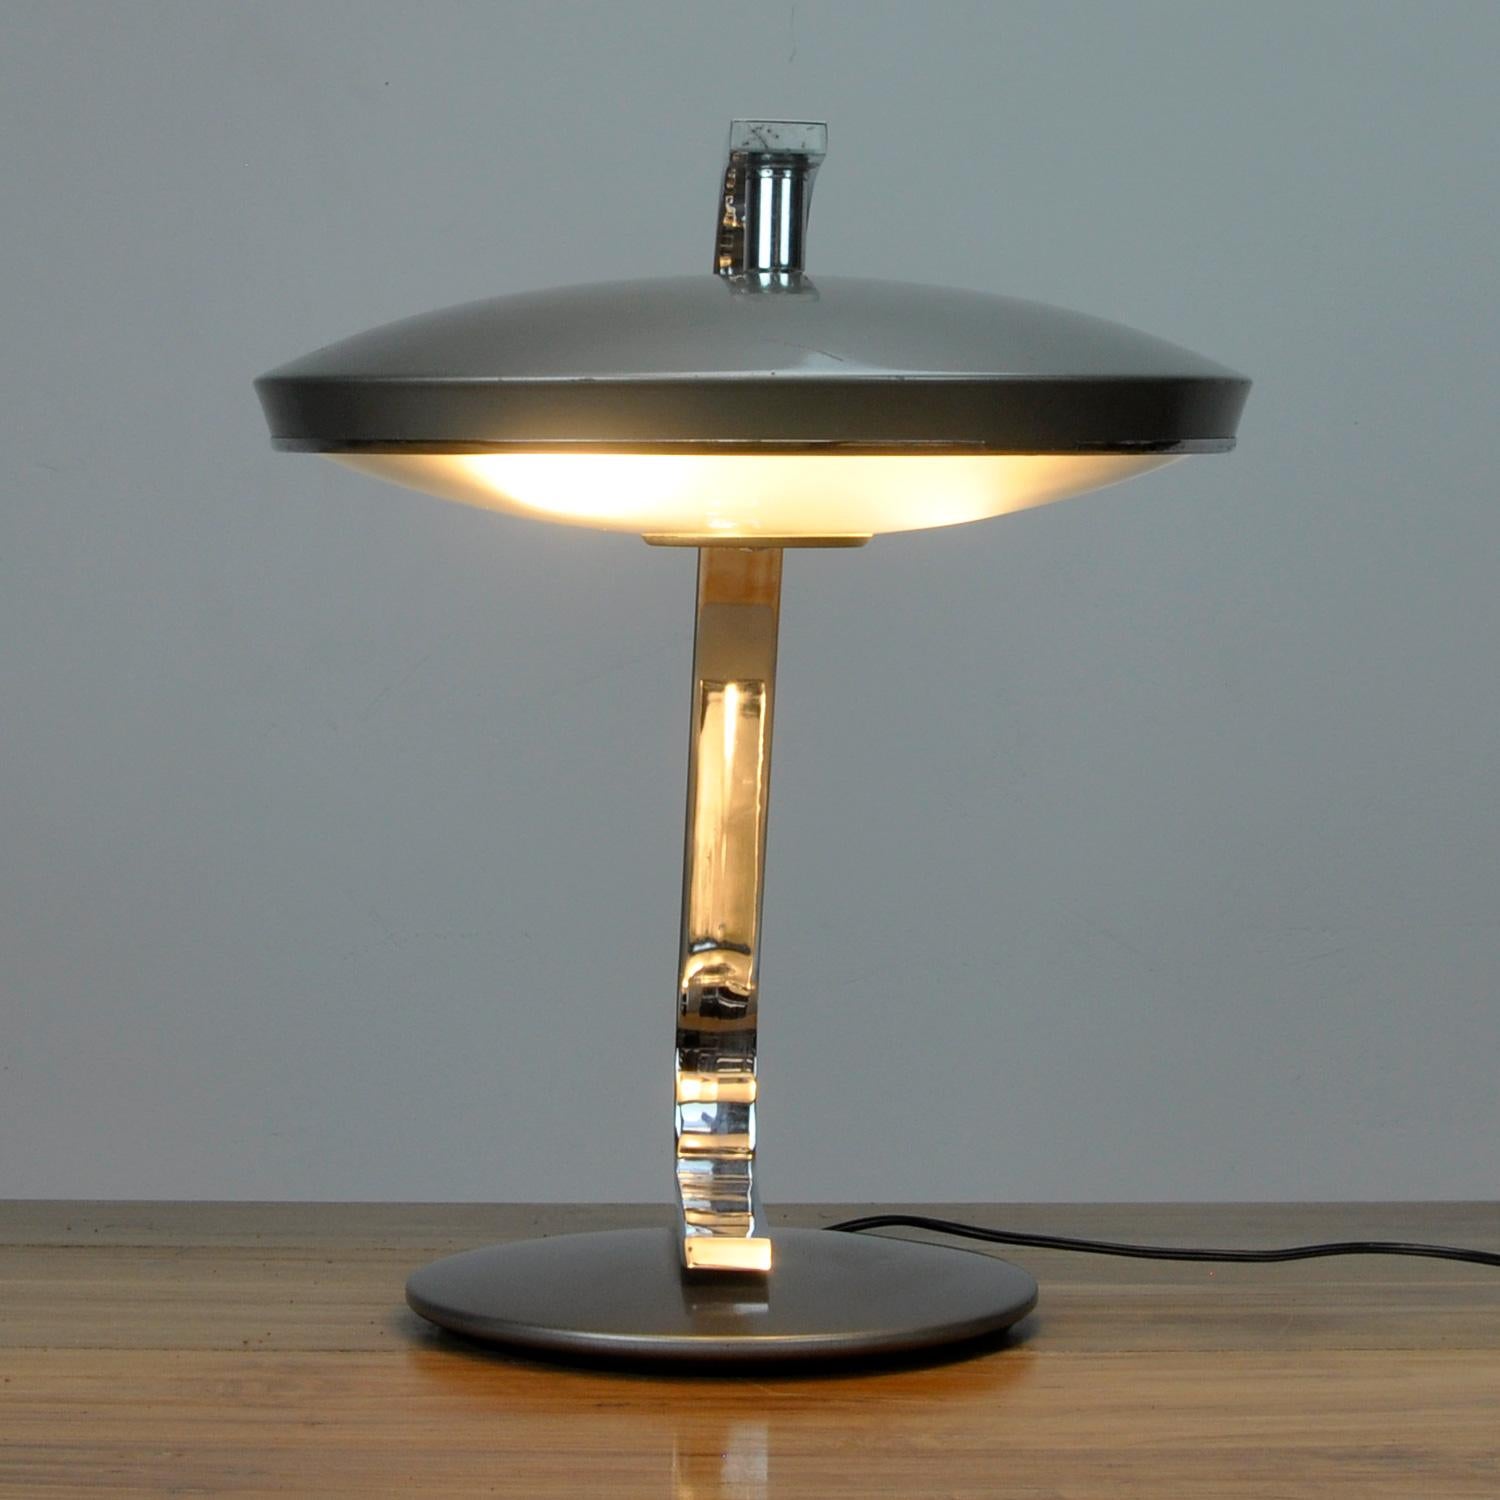 Desk lamp from the Spanish lighting manufacturer Fase.

Beautiful design in original gray with shiny chrome and frosted glass diffuser that radiates a beautiful light. Double lamp holder, suitable for 2 standard lamps. Currently wired with the